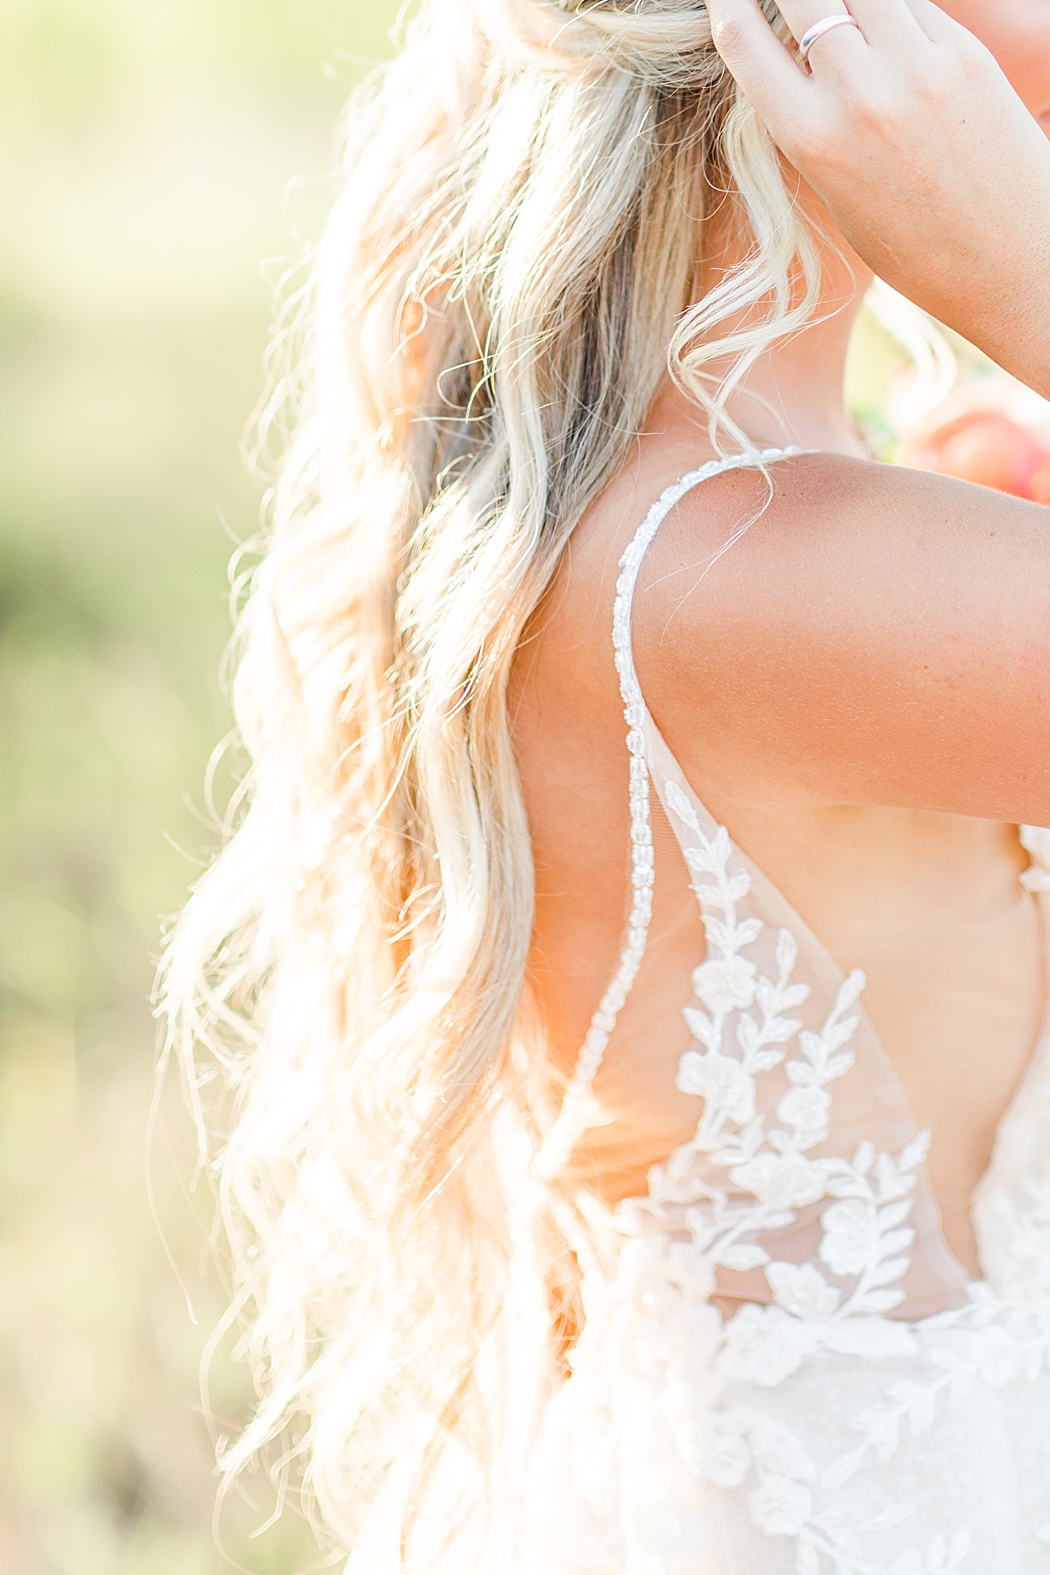 Summer Bridal Session at Contigo Ranch in Frederickburg Texas by Allison Jeffers Photography 0017